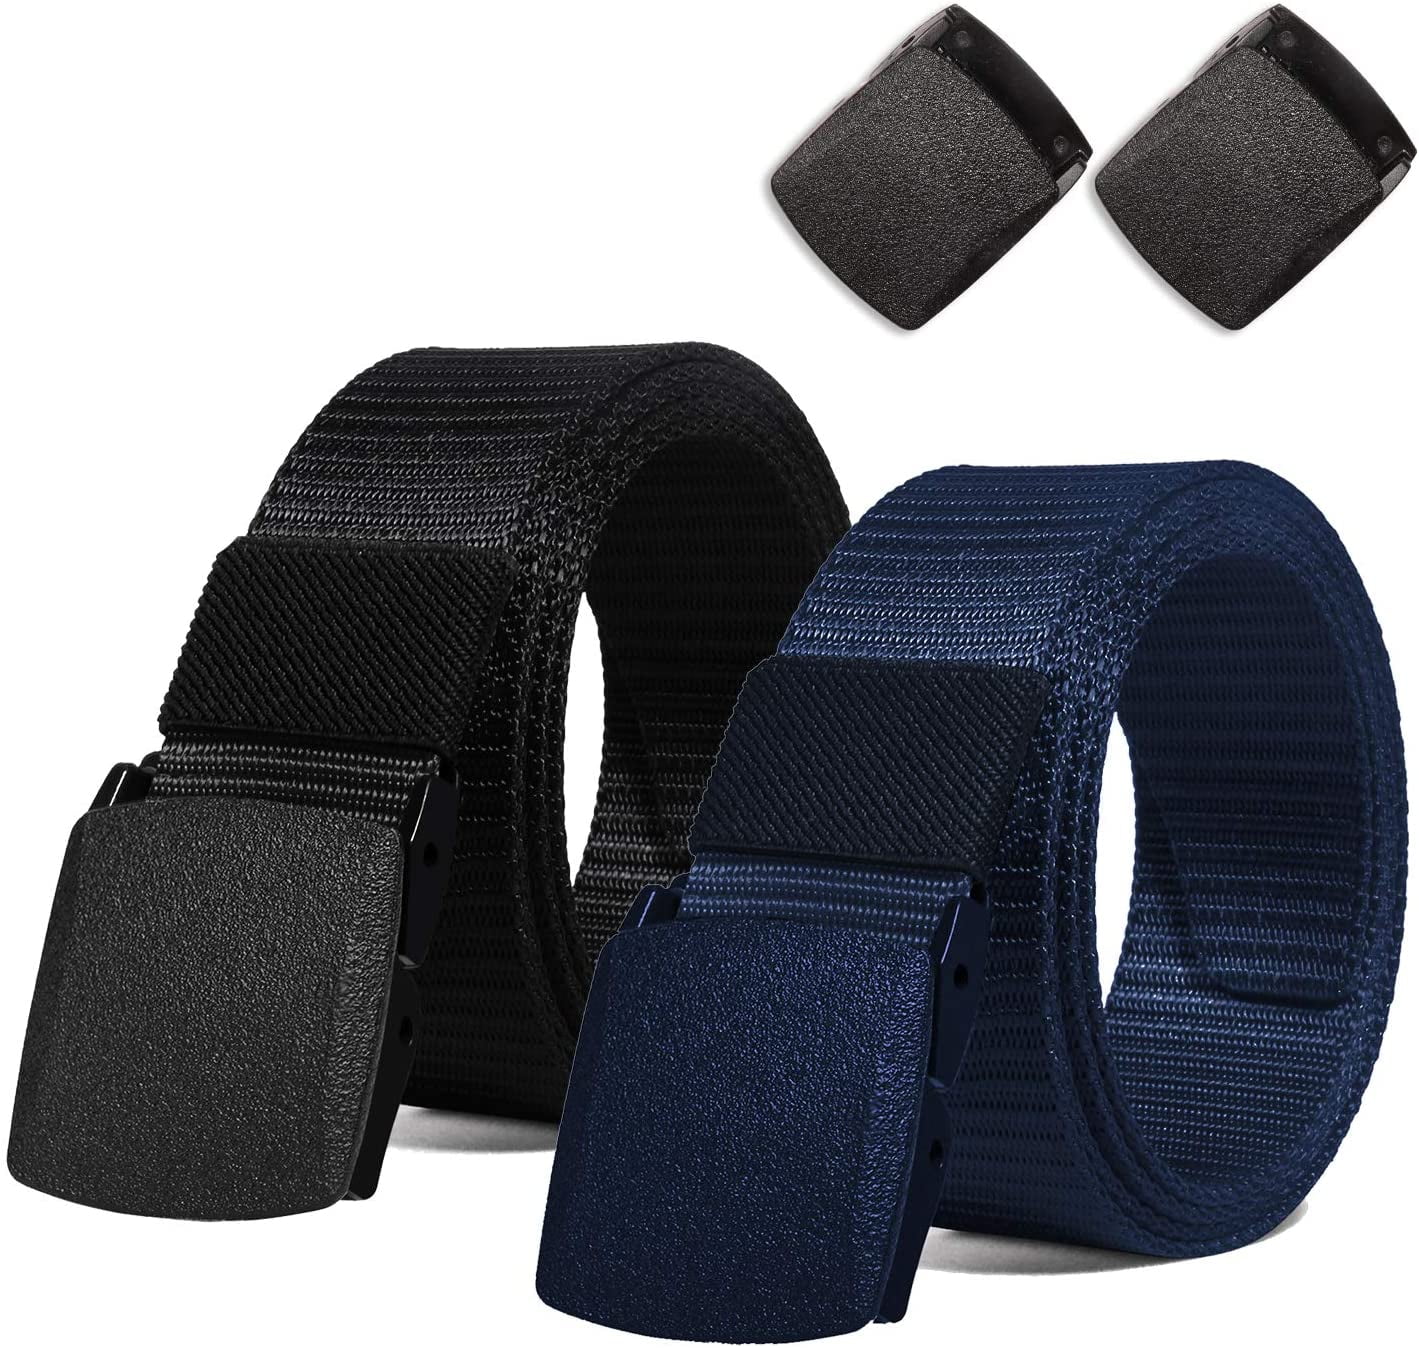 Tactical Belt,2 Packs Nylon Web Belt 1.25 Inch Military Style Mens Belt with Heavy Duty Quick Realease Small Buckle 